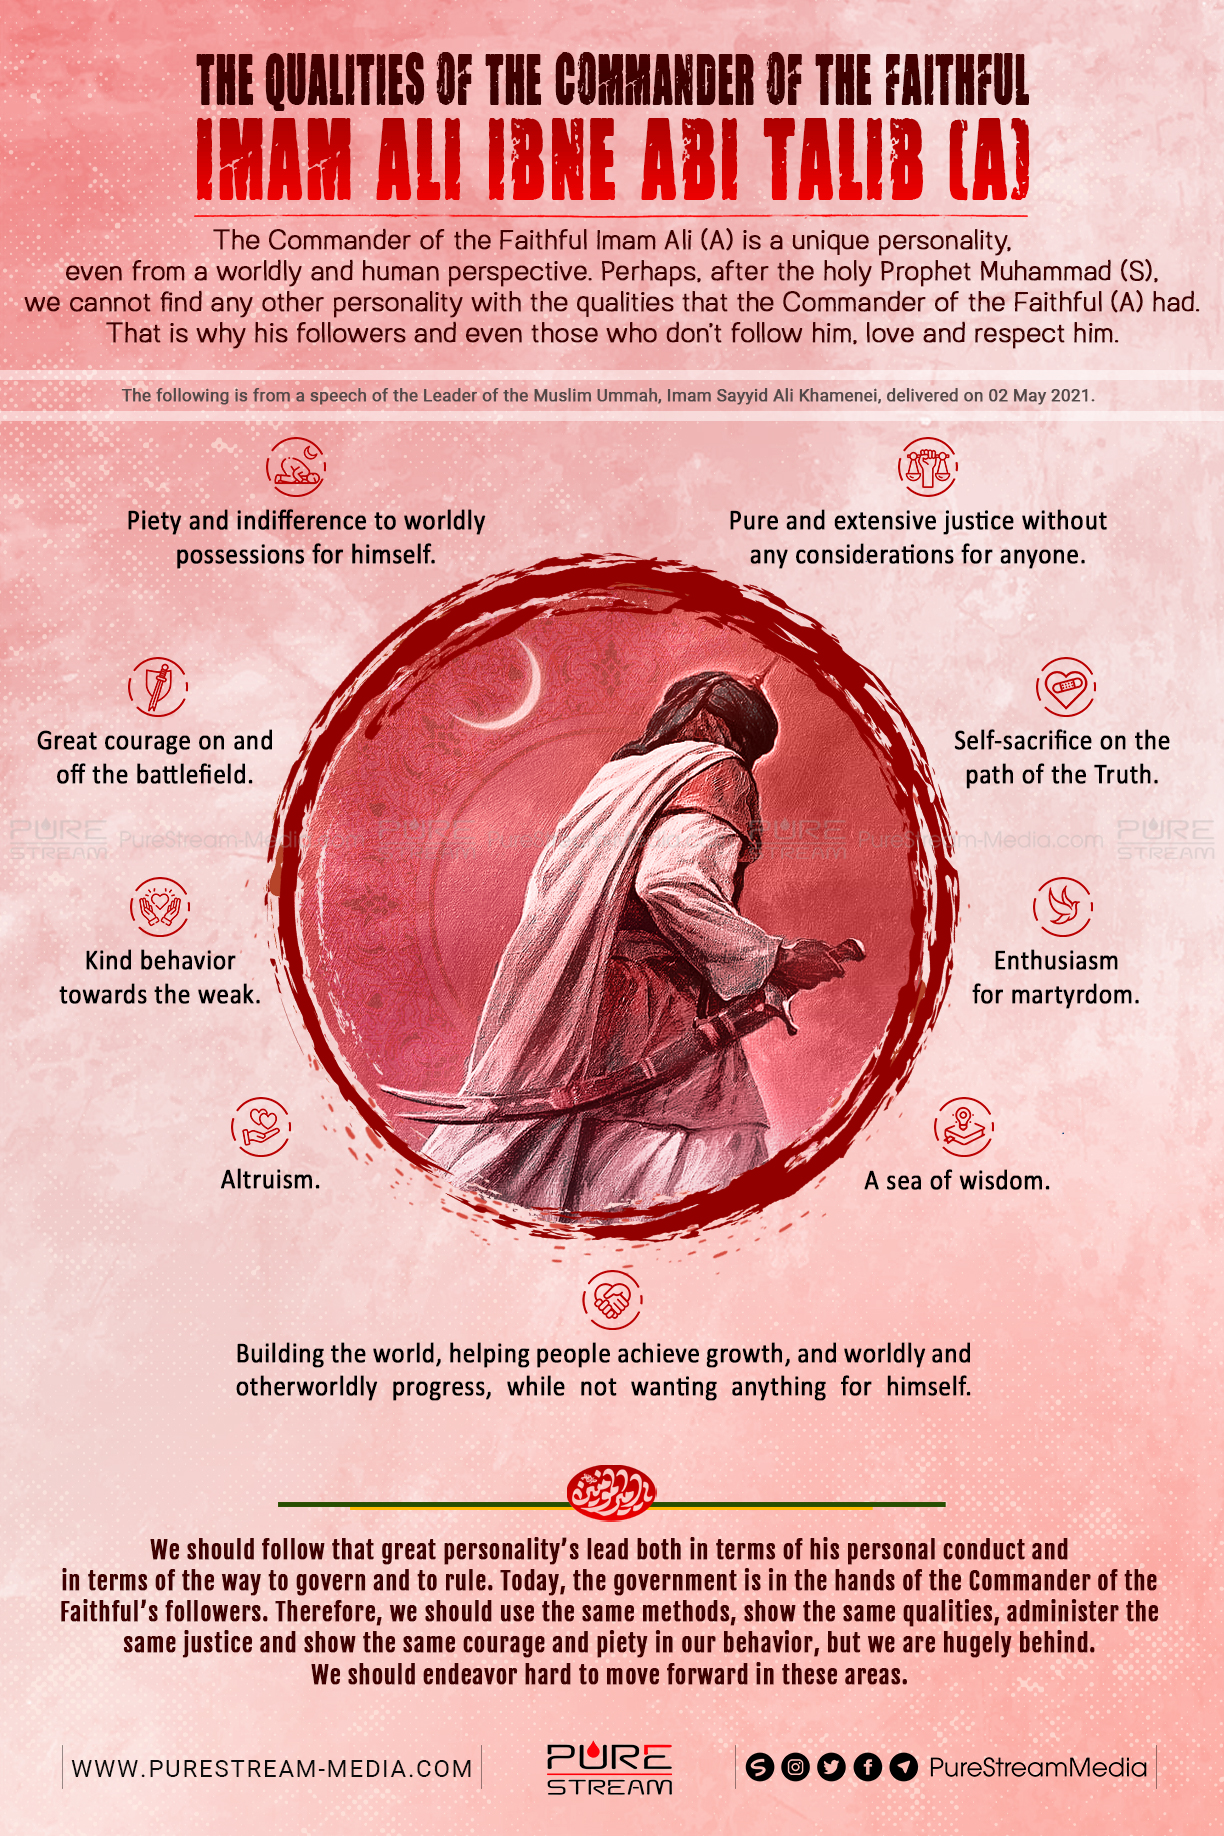 The Qualities of the Commander of the Faithful Imam Ali ibne Abi Talib (A) | Infographic